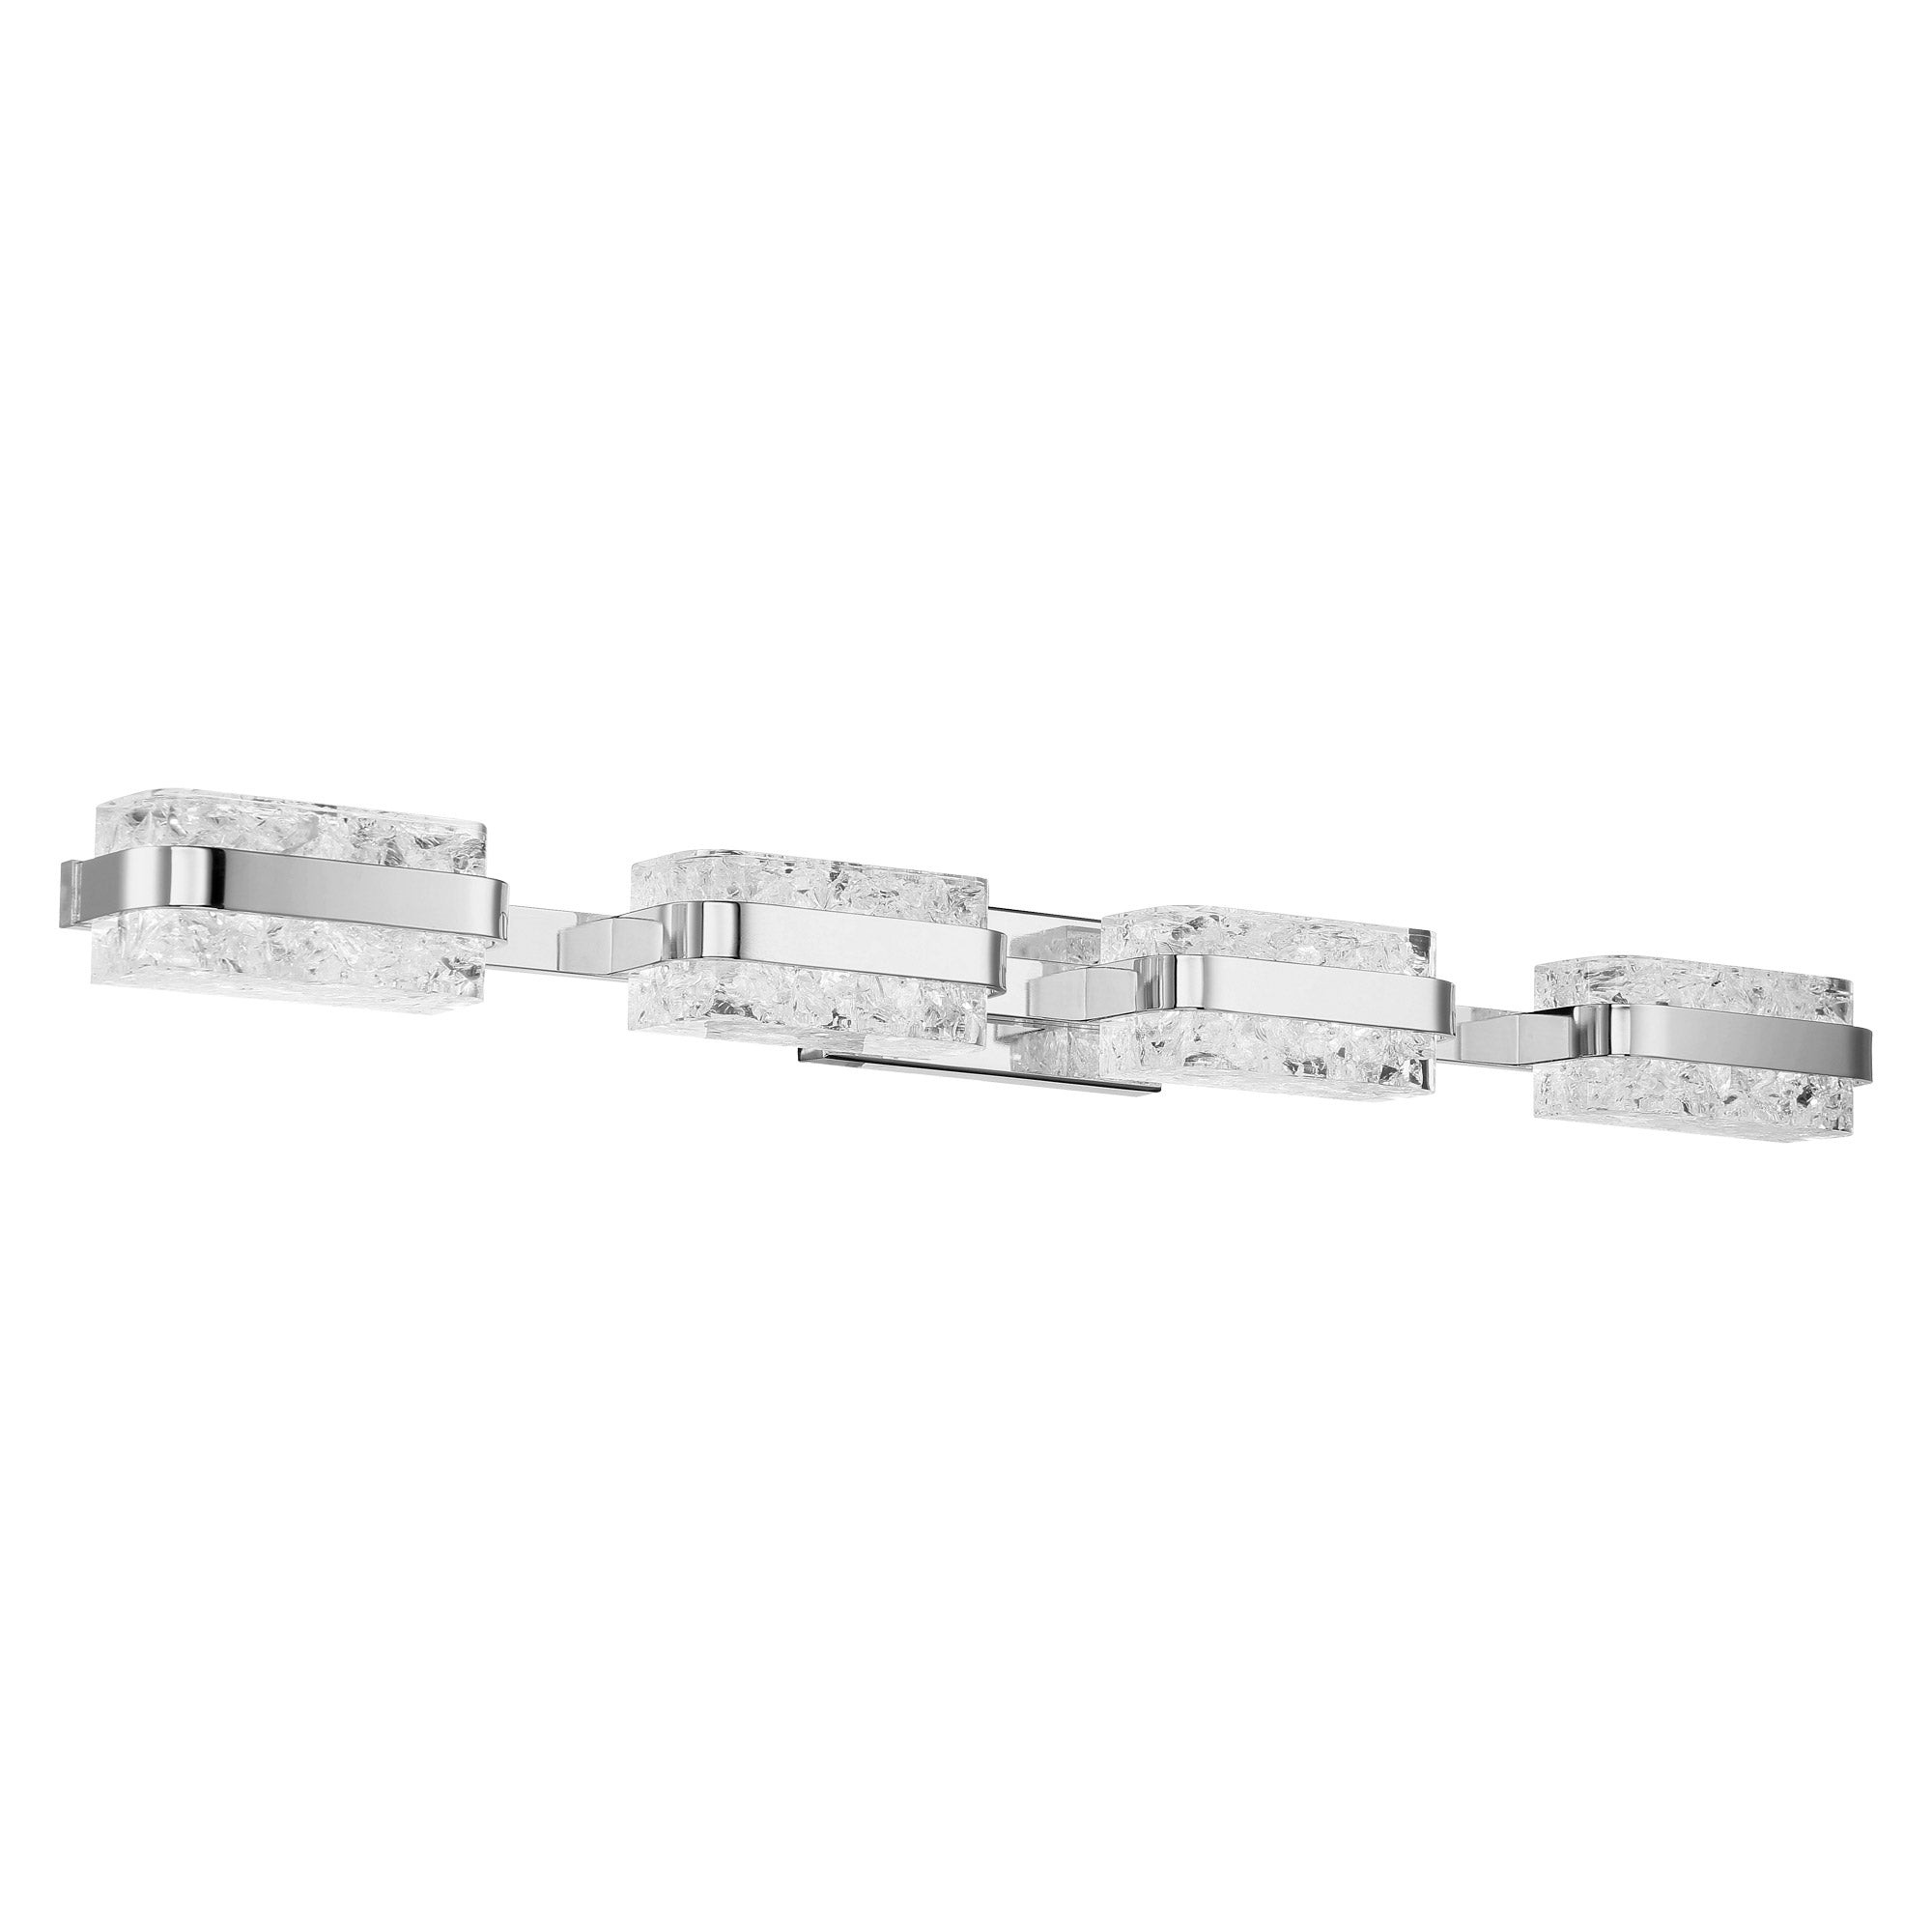 FORBES Bathroom sconce Nickel INTEGRATED LED - WS-63037-PN | MODERN FORMS